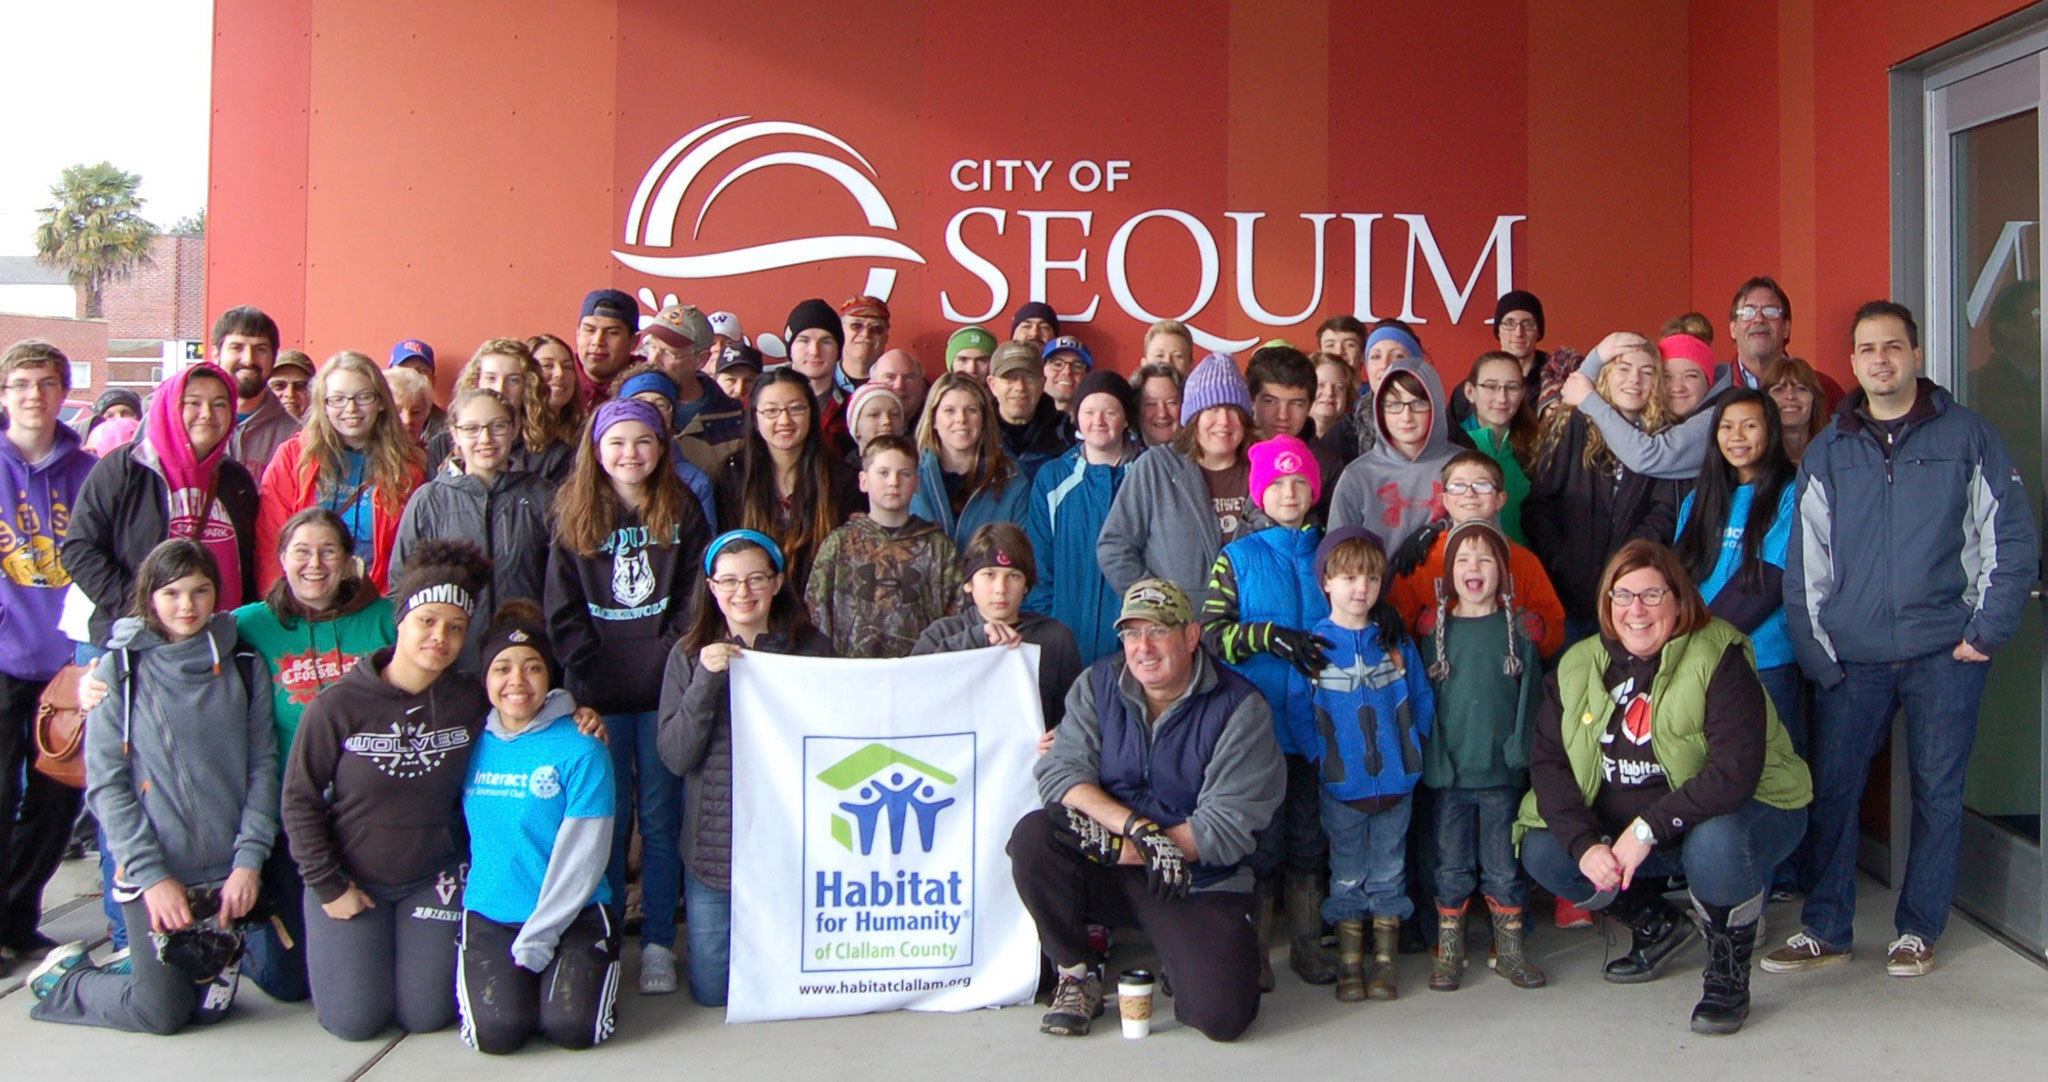 Volunteers gathered to clean up dowtown Sequim